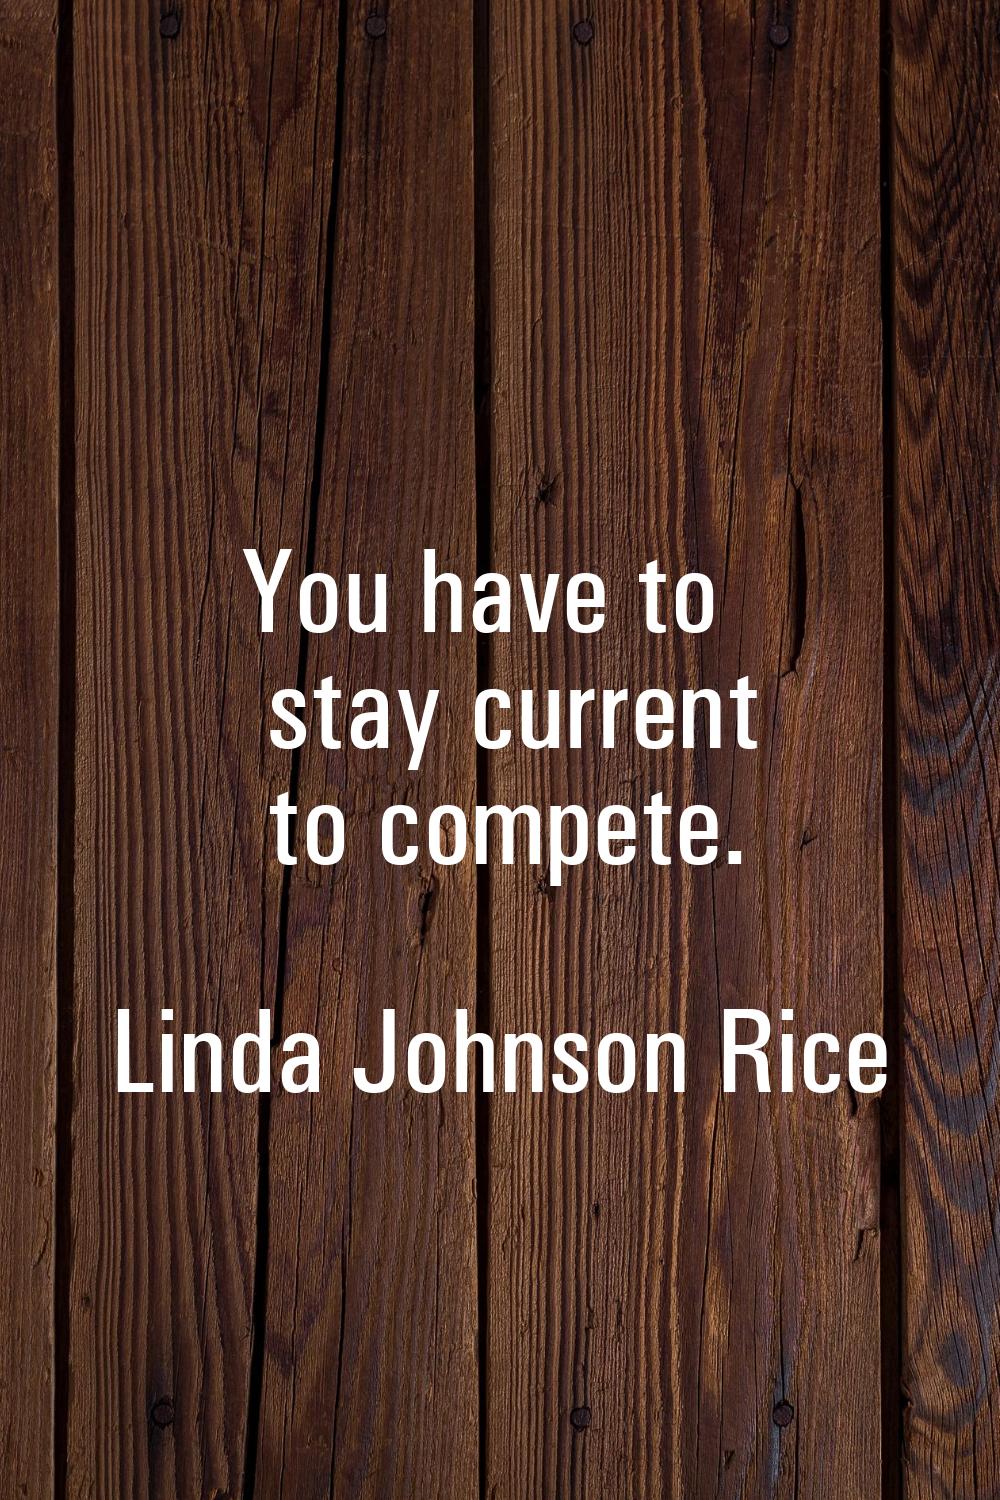 You have to stay current to compete.